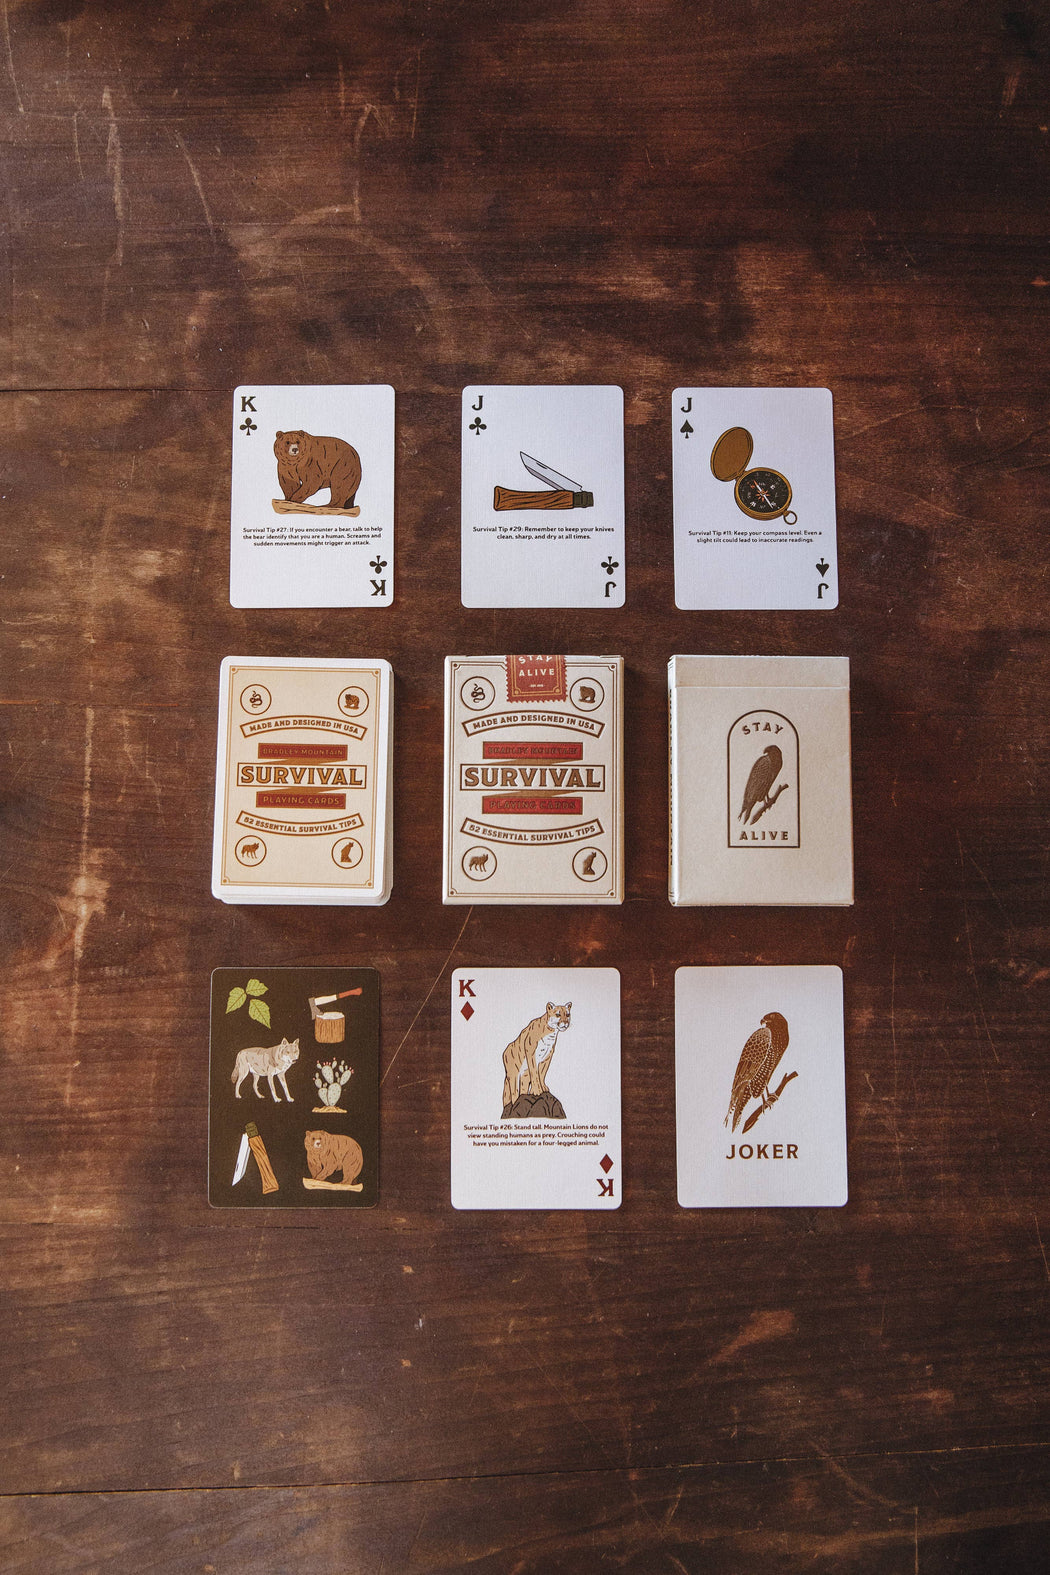 Survival Playing Card Deck